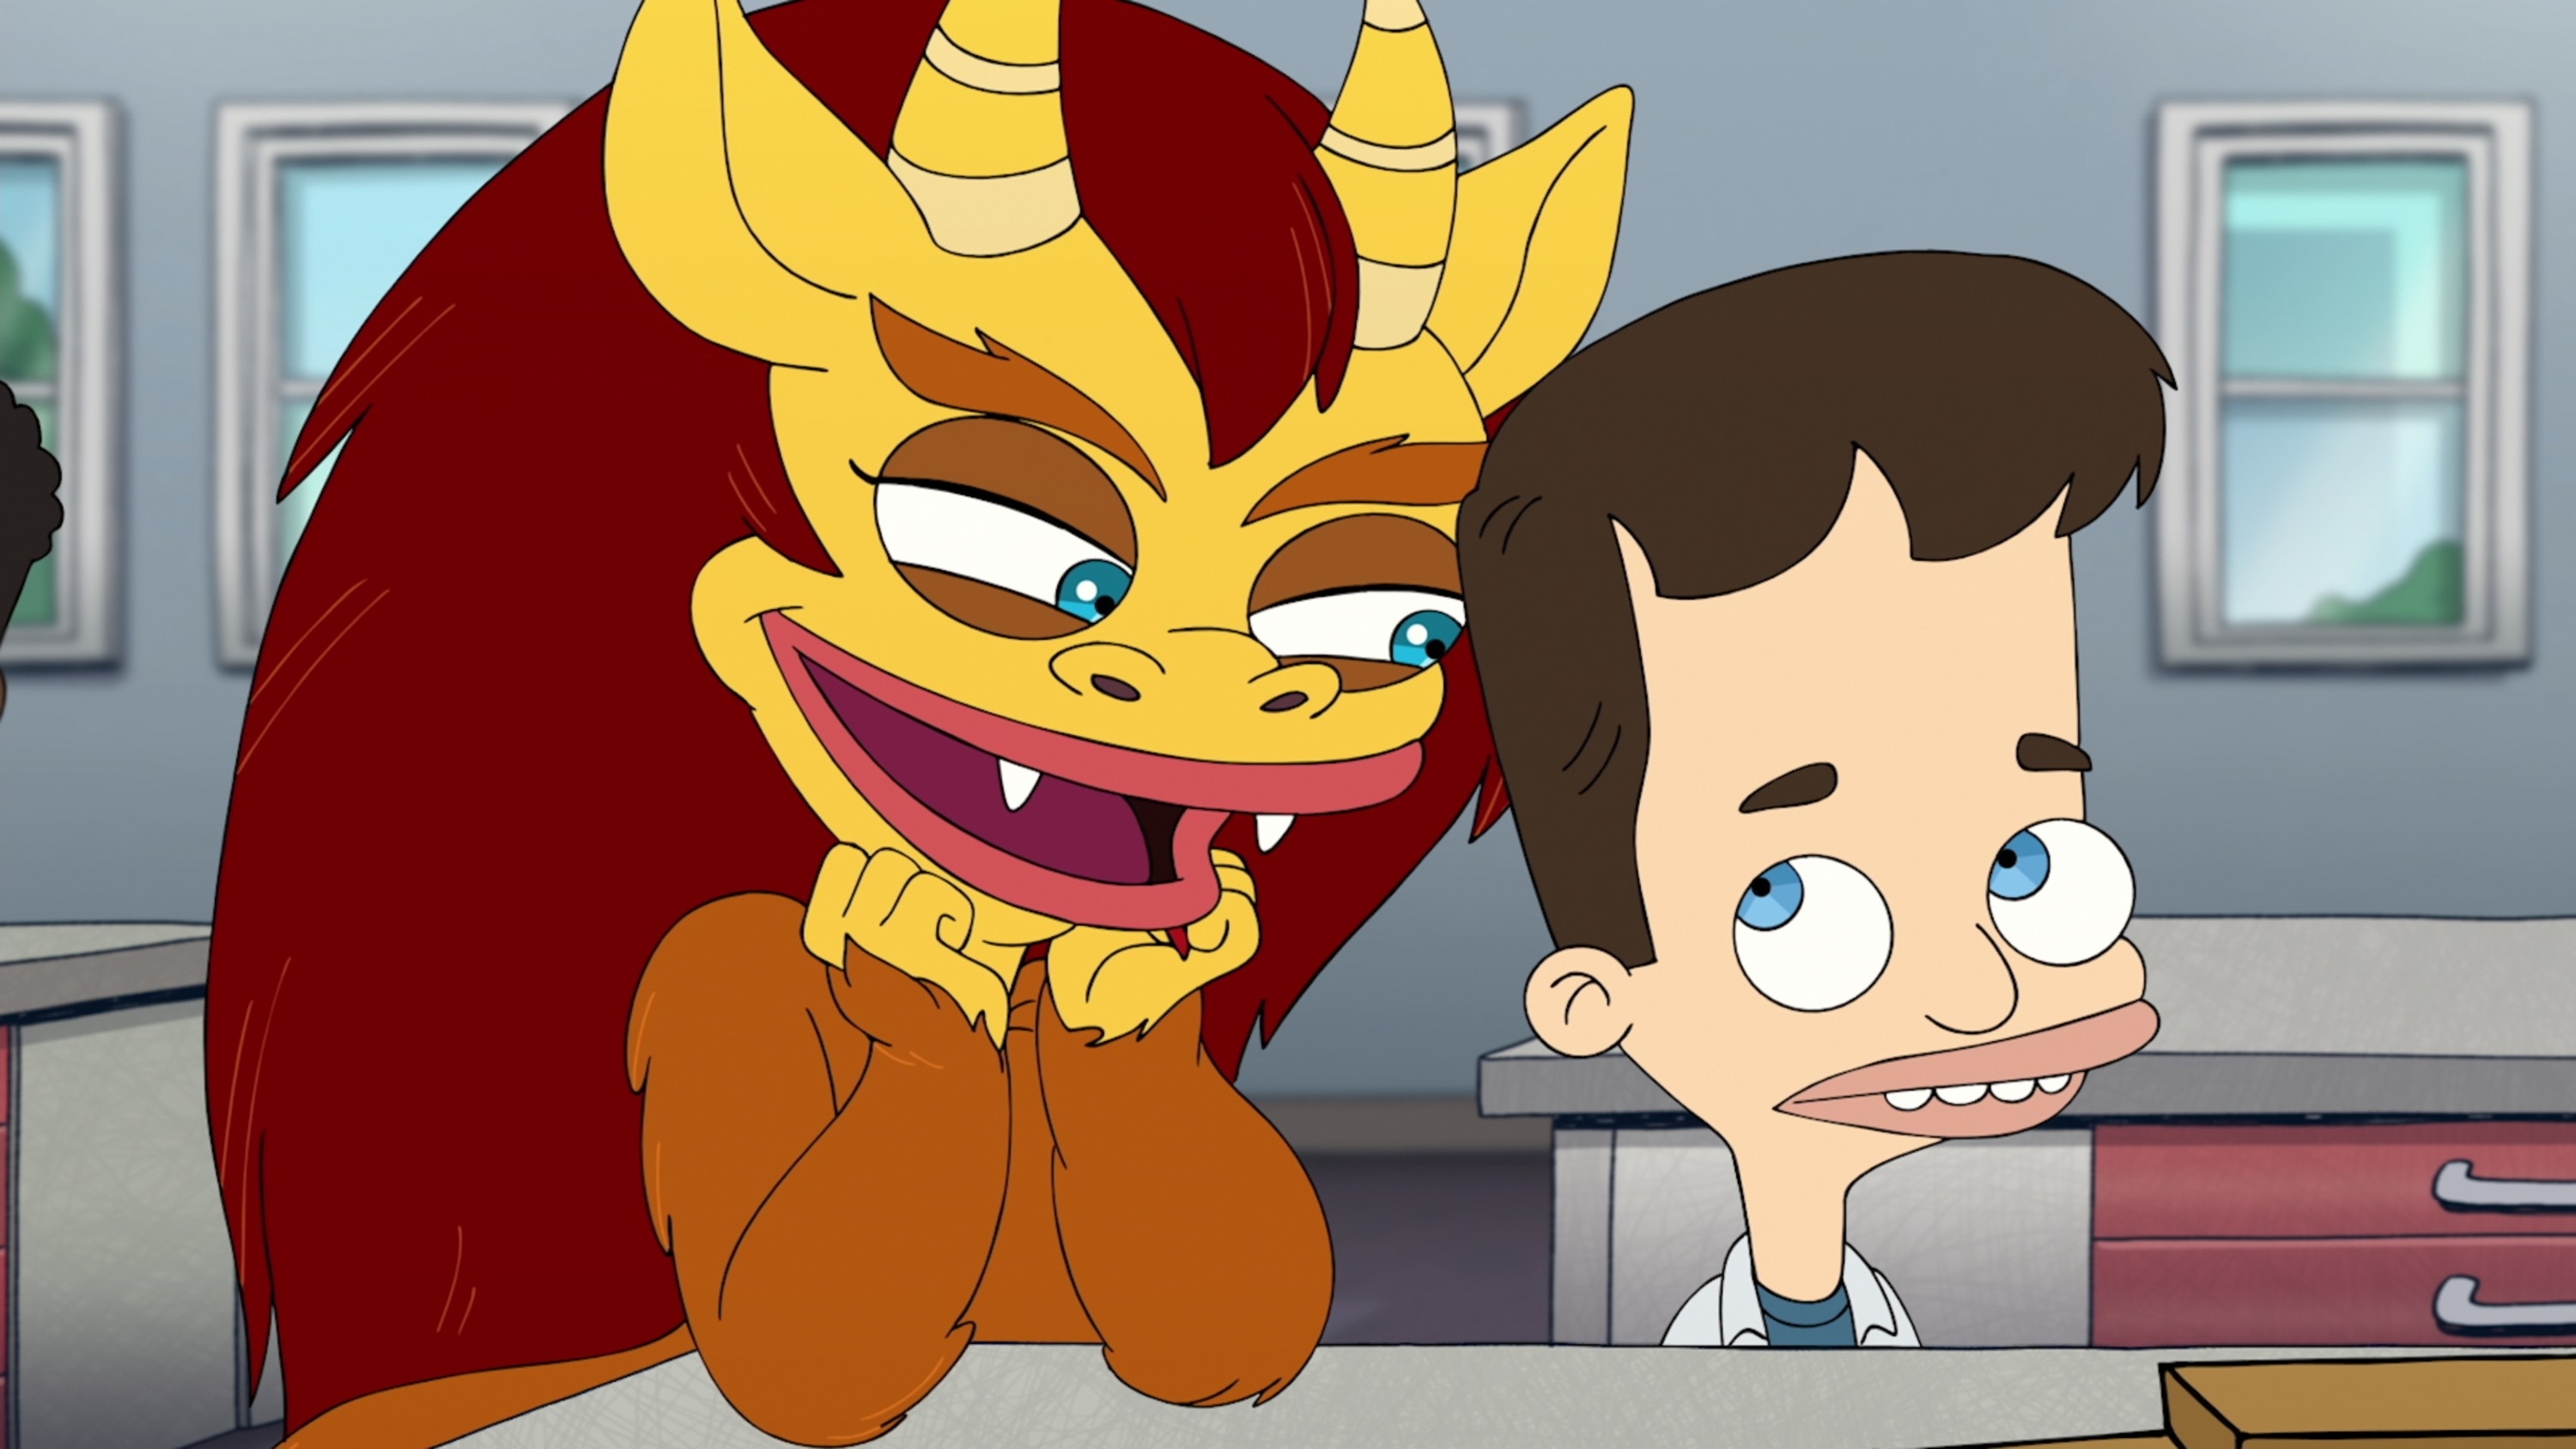 Animated characters, a smiling dragon creature next to a boy with a surprised expression, from the show &quot;Big Mouth.&quot;